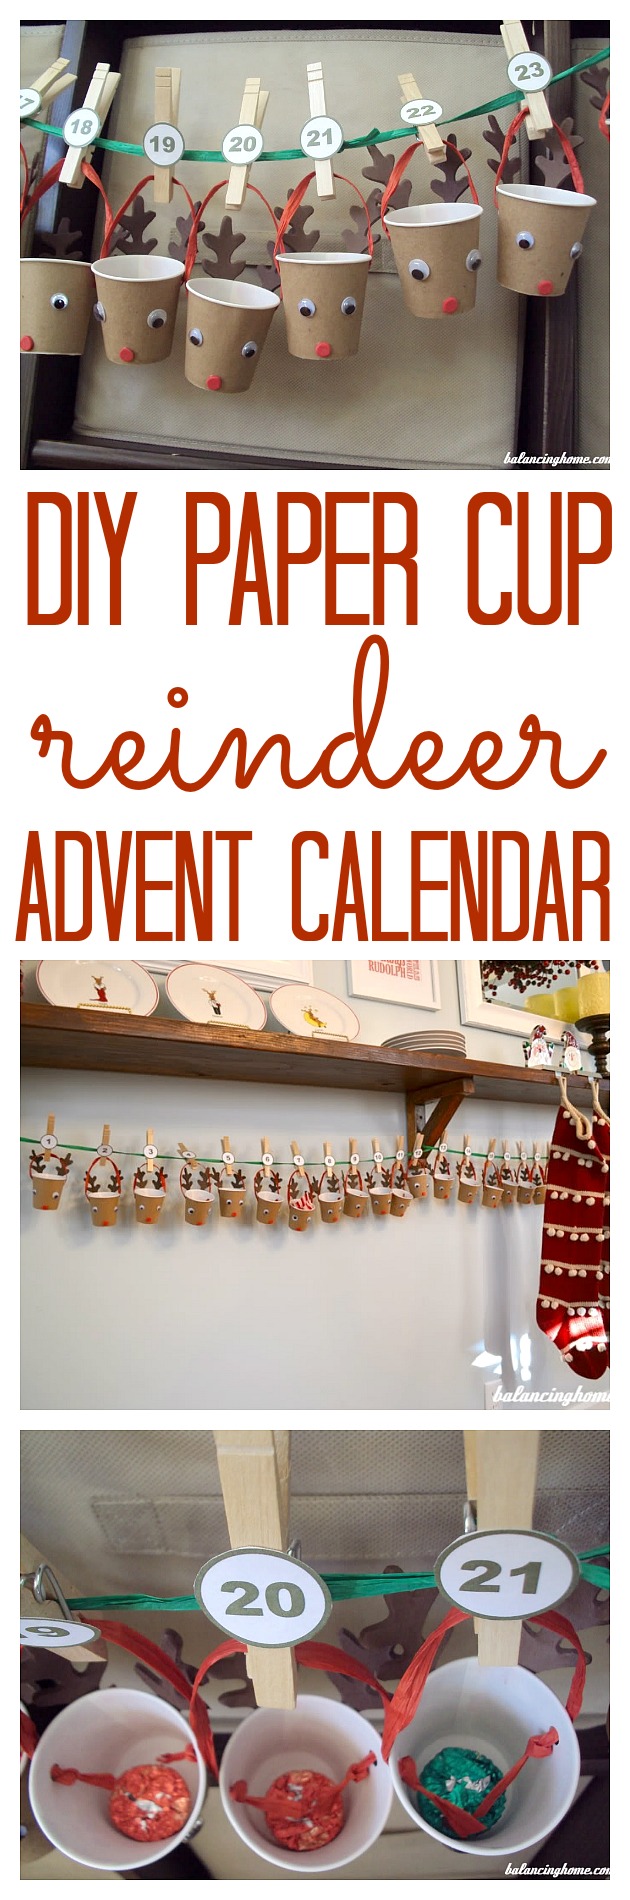 10 Easy Advent Calendars to Make at Home to Help You Count Down to